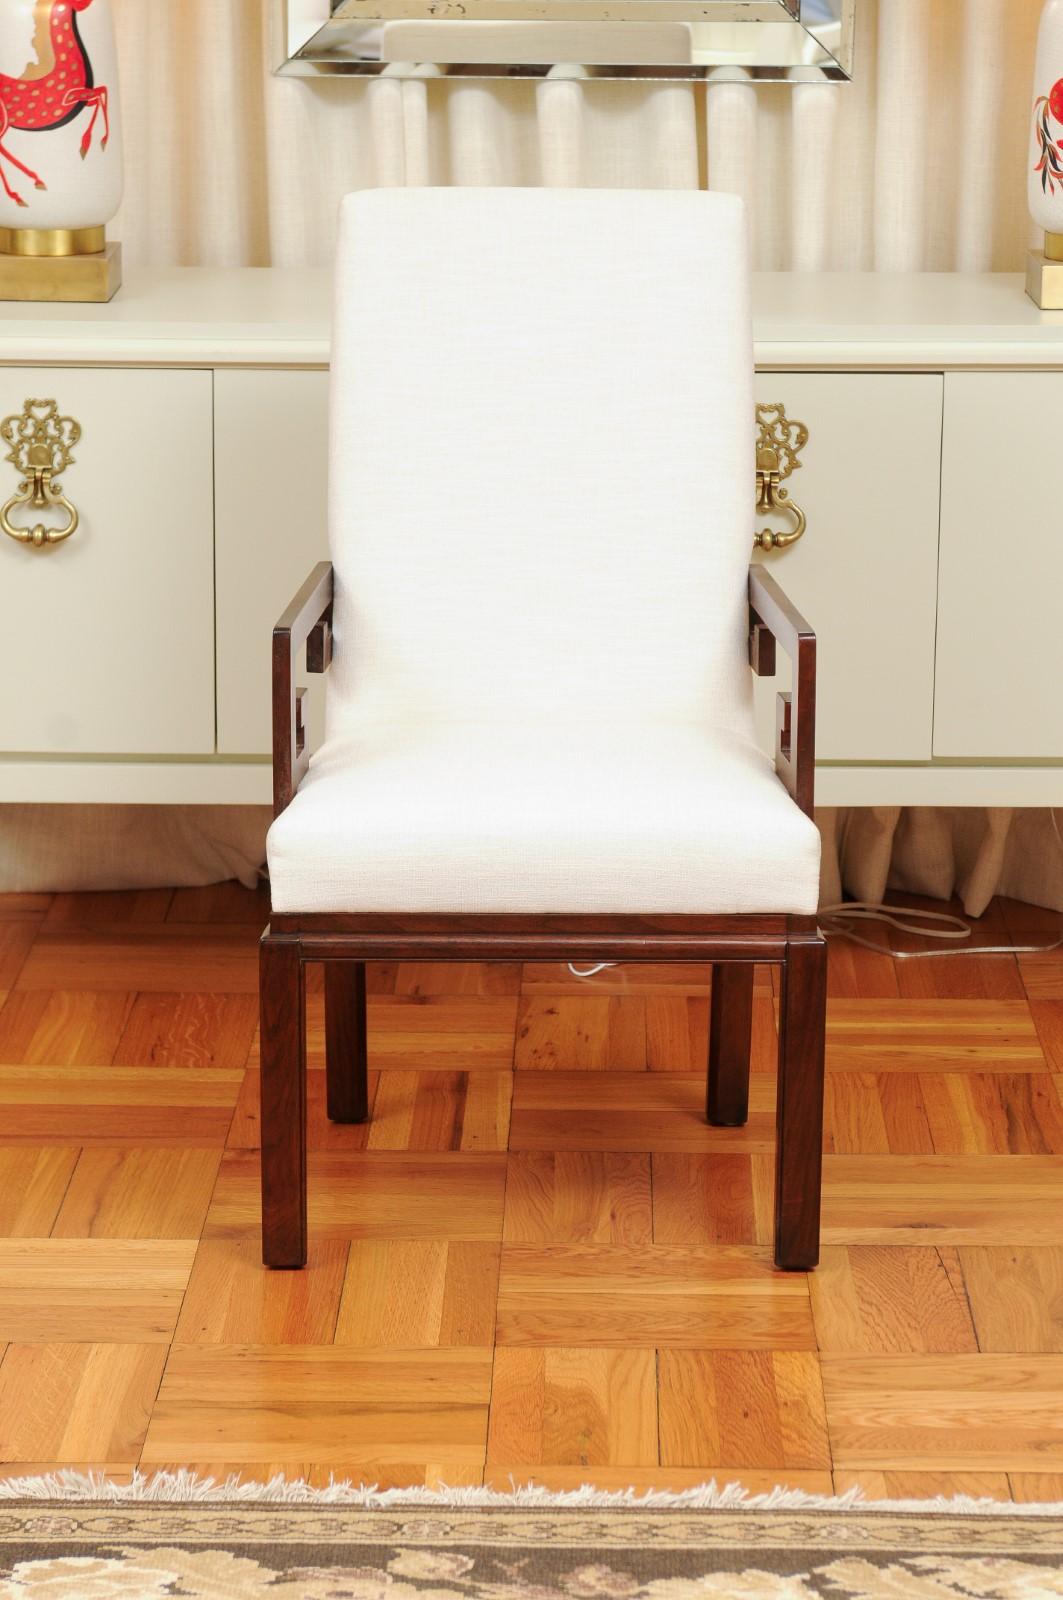 These magnificent dining chairs are shipped as professionally photographed and described in the listing narrative, completely installation ready. This large all arm set is unique on the World market. Expert custom upholstery service is